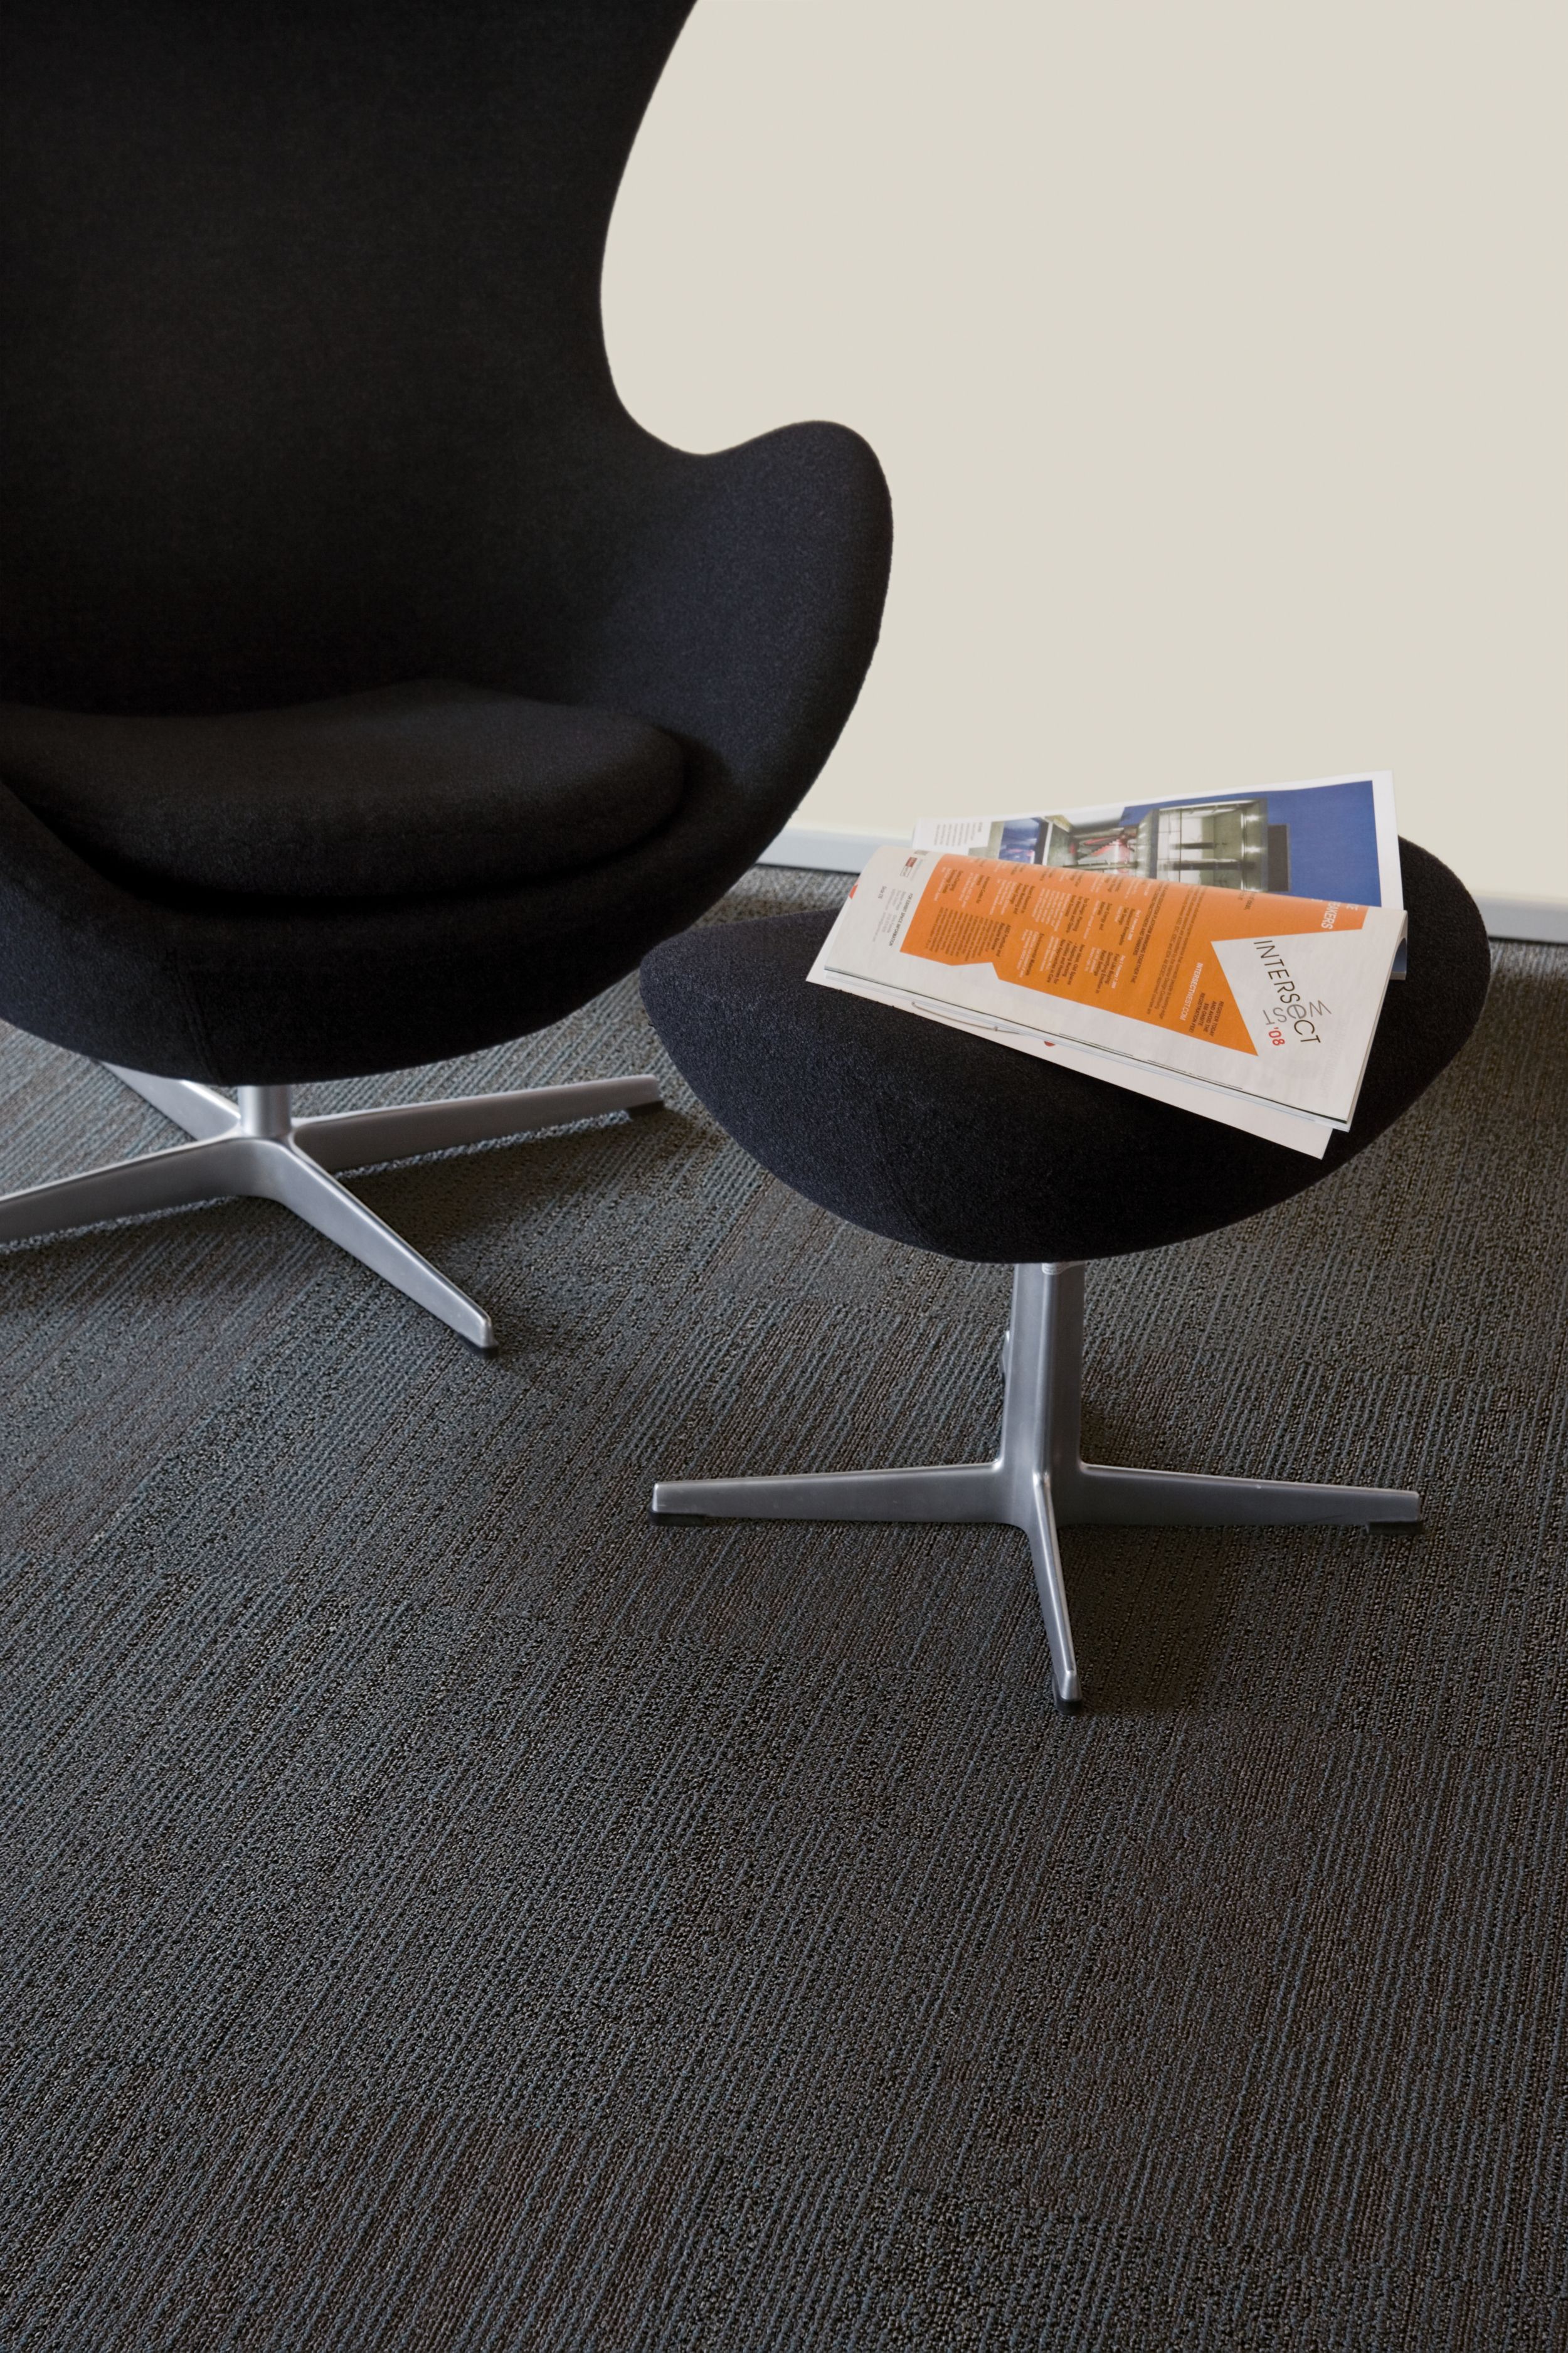 Detail of Interface San Roco carpet tile with chair and ottoman imagen número 2